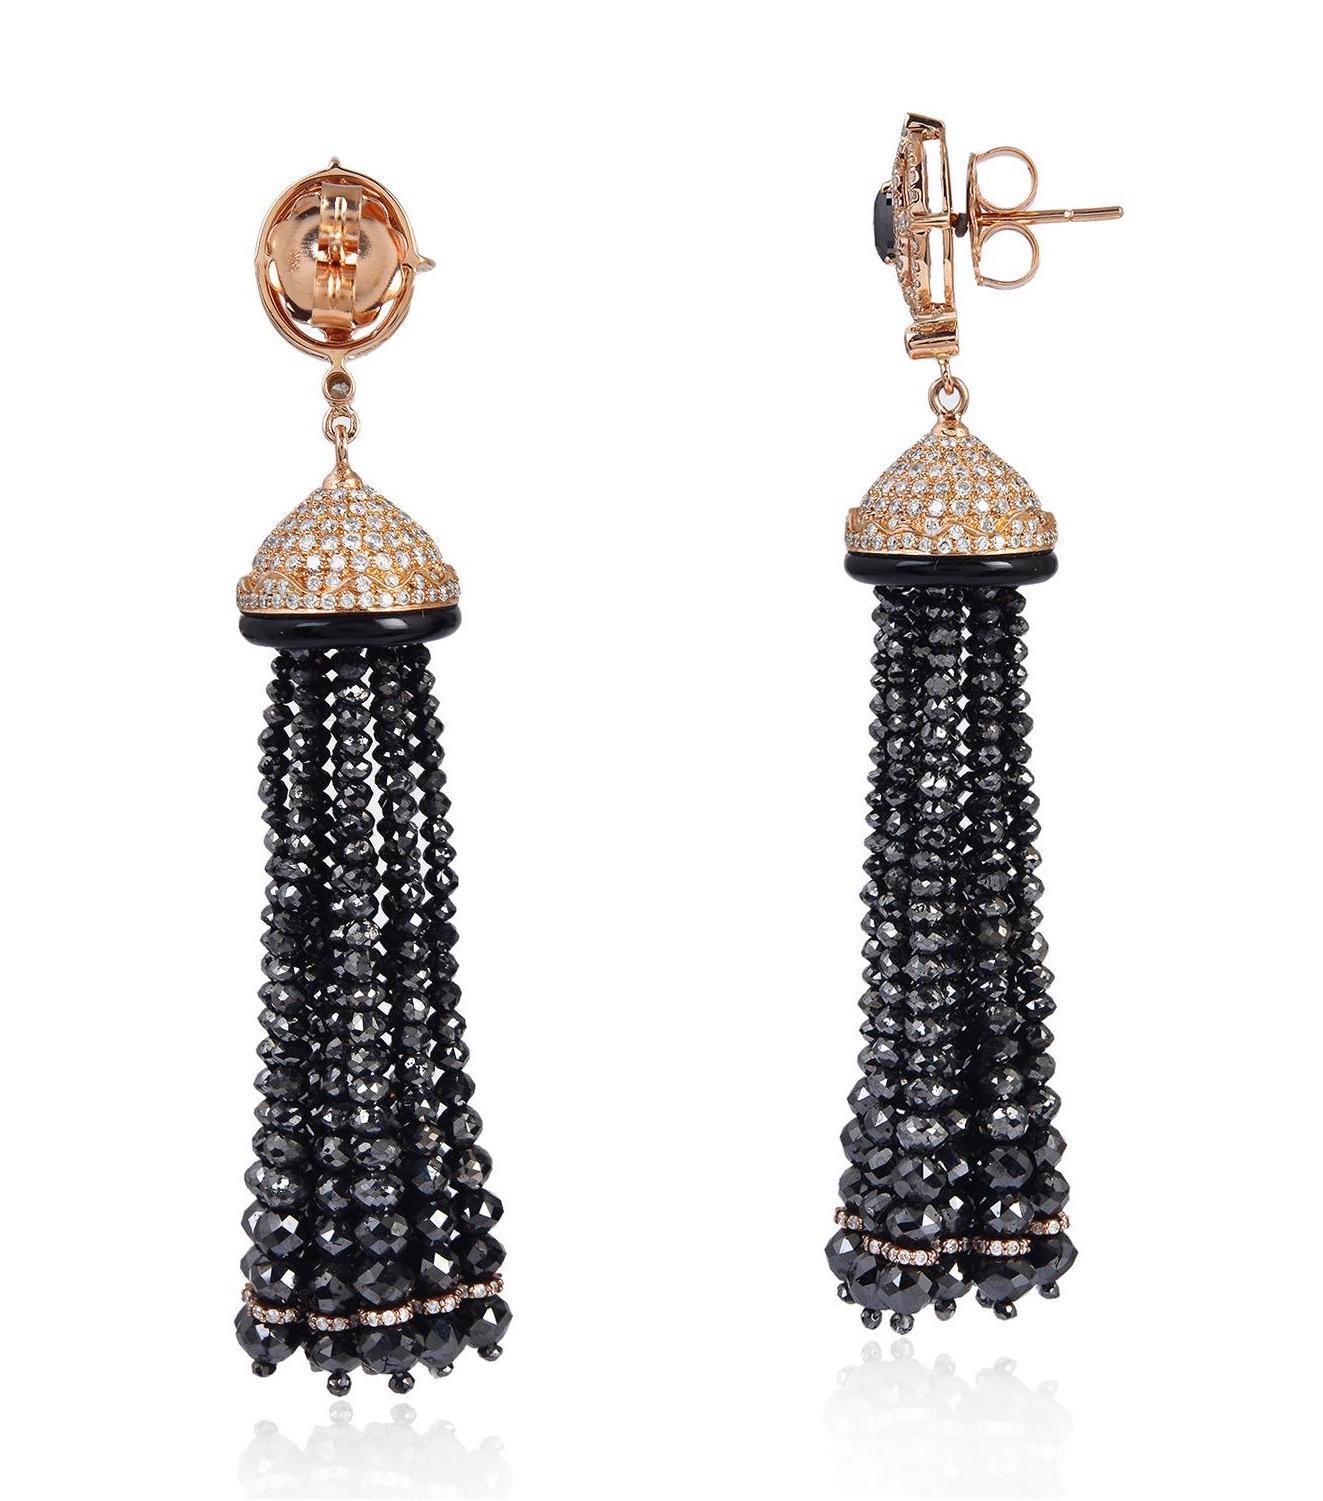 These stunning tassel earrings are handmade in 18-karat gold.  It is set in 2.94 carats onyx, 91.68 carats fancy and pave diamonds. 

FOLLOW  MEGHNA JEWELS storefront to view the latest collection & exclusive pieces.  Meghna Jewels is proudly rated